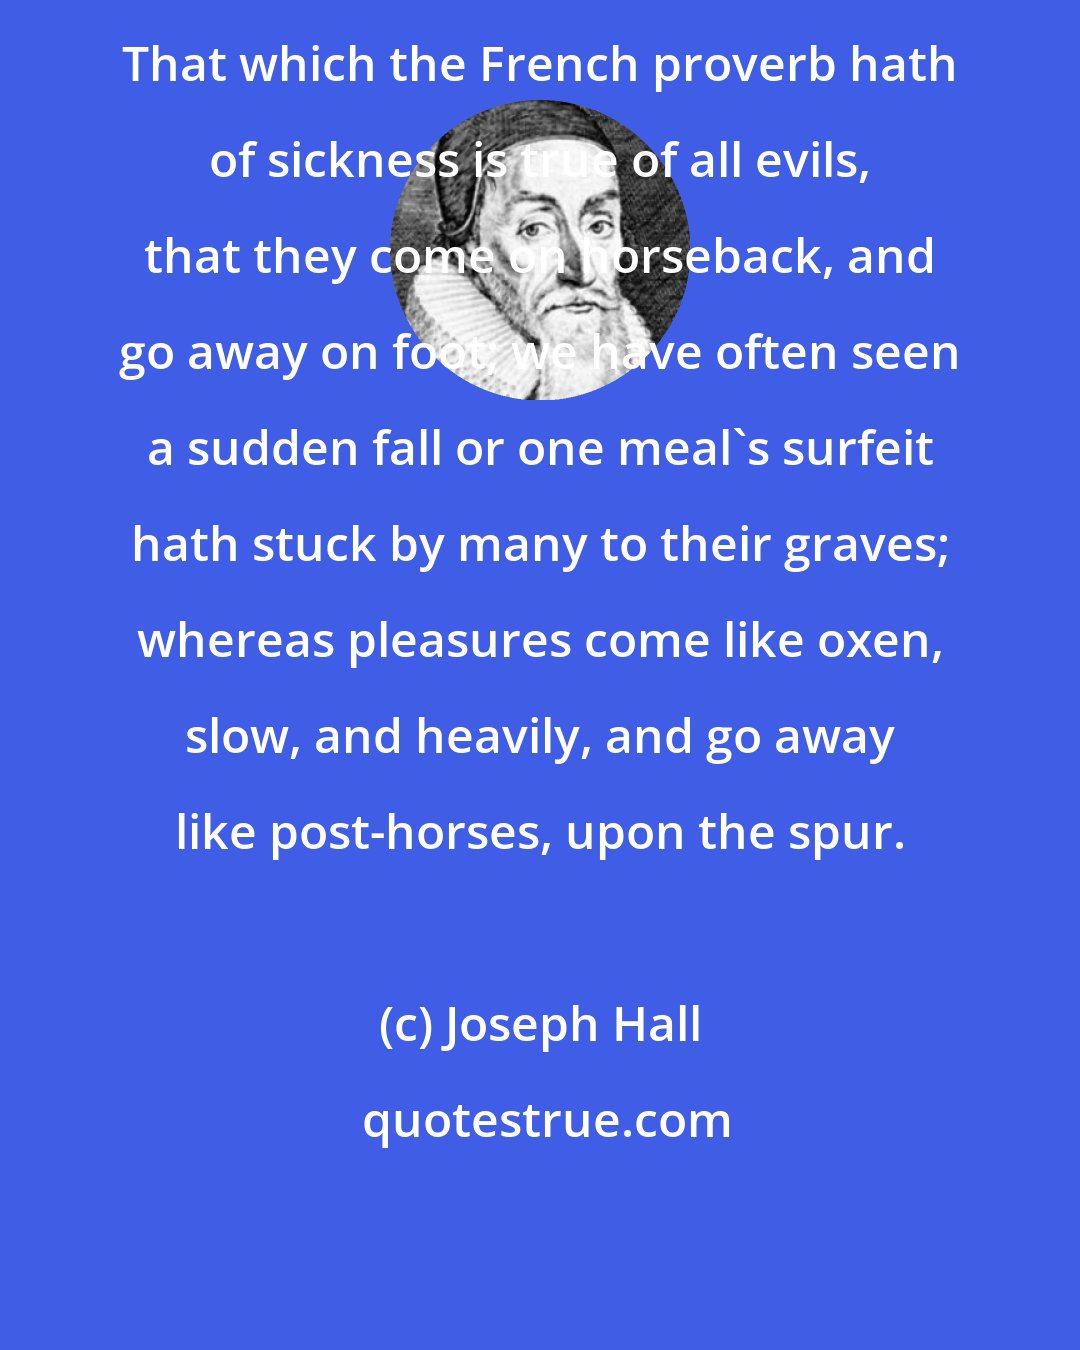 Joseph Hall: That which the French proverb hath of sickness is true of all evils, that they come on horseback, and go away on foot; we have often seen a sudden fall or one meal's surfeit hath stuck by many to their graves; whereas pleasures come like oxen, slow, and heavily, and go away like post-horses, upon the spur.